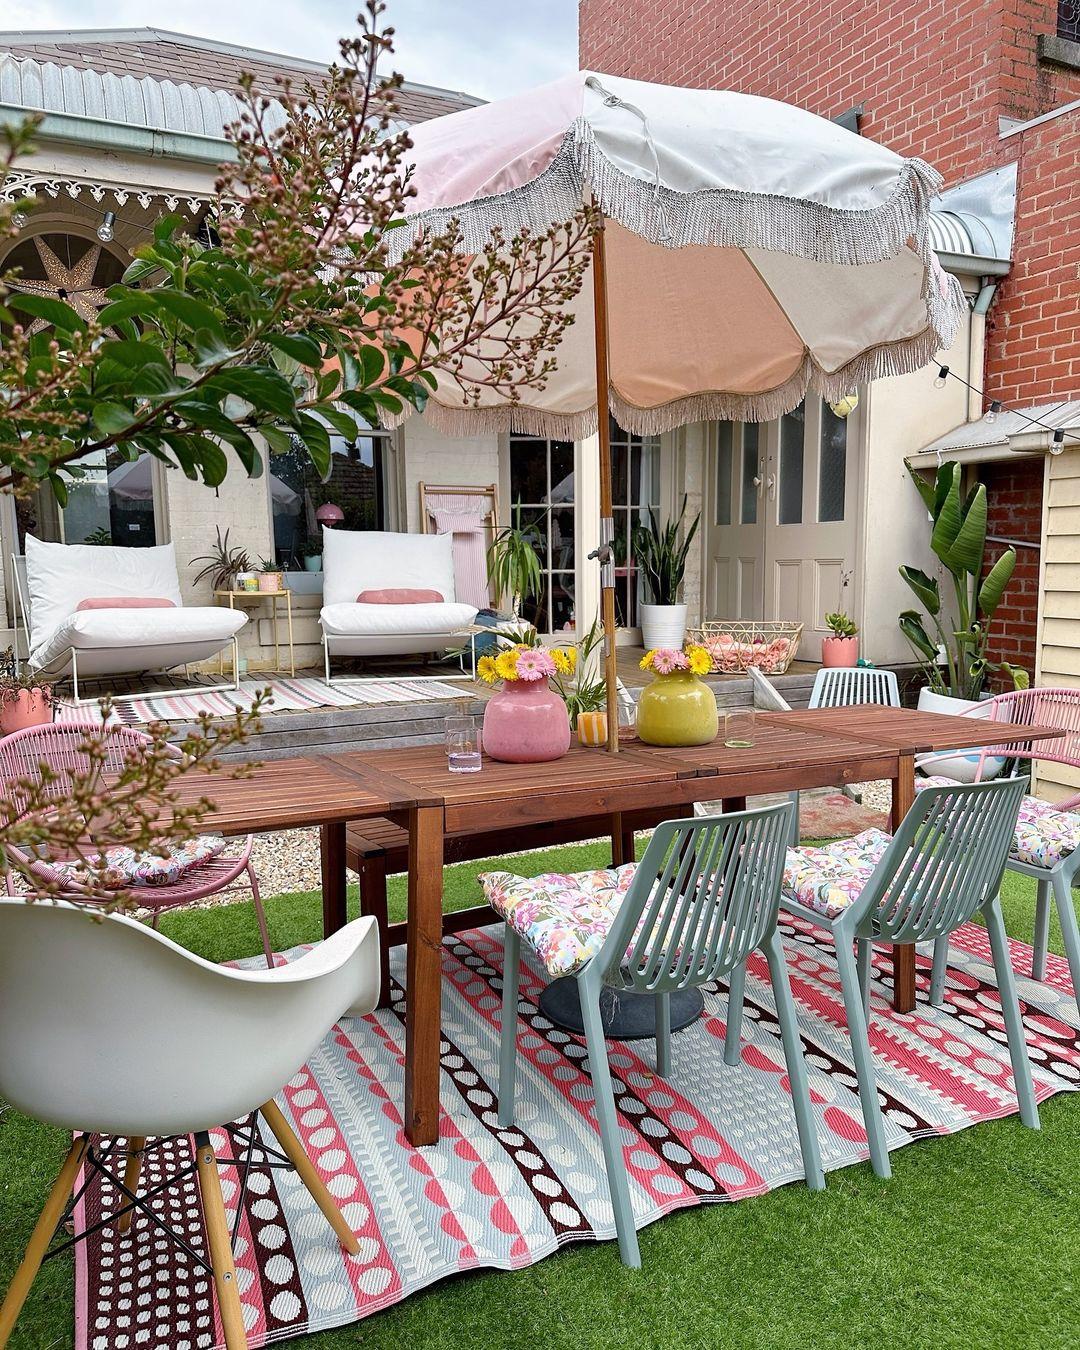 Colorful outdoor rugs